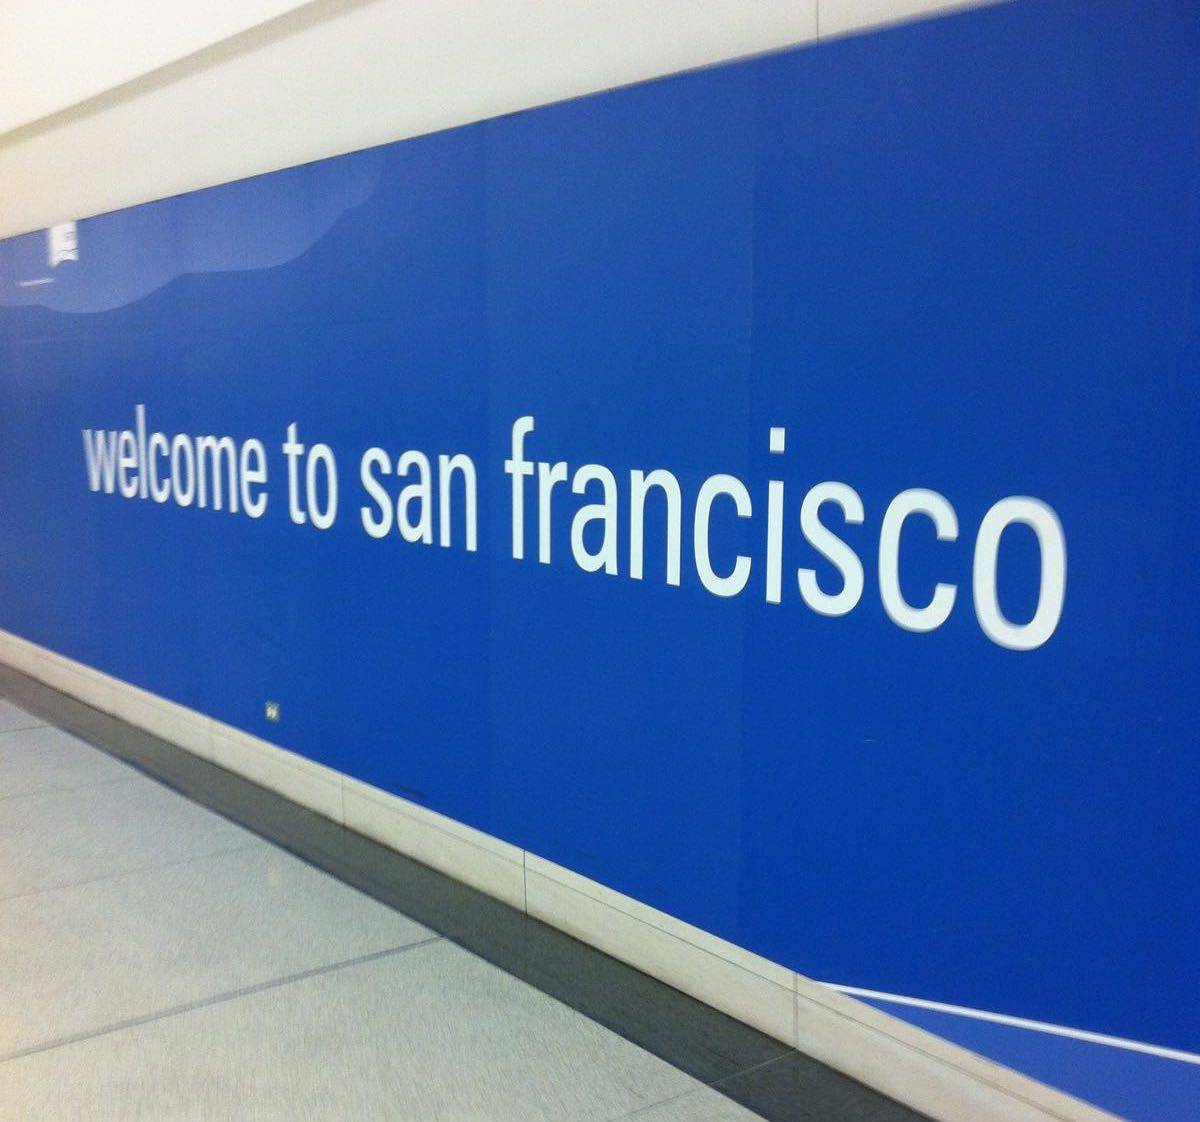 Welcome to san francisco